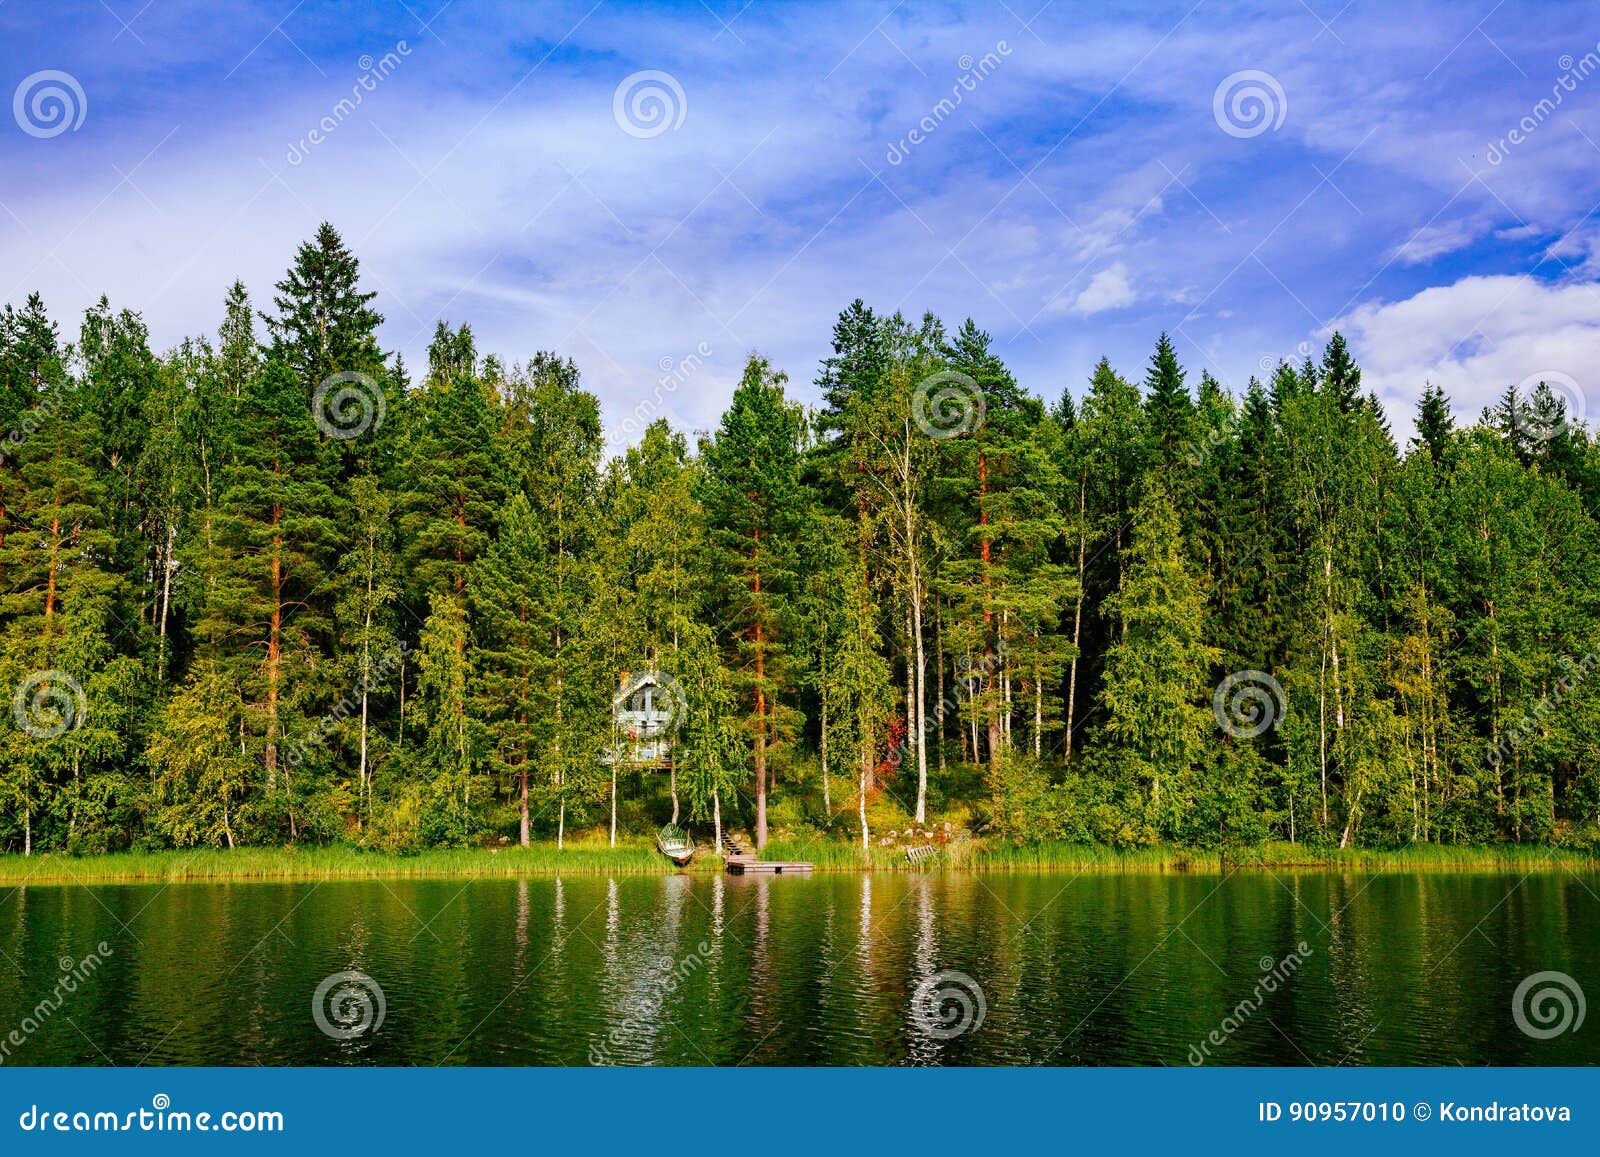 Wooden Log Cabin at the Lake in Summer in Finland Stock Photo - Image ...